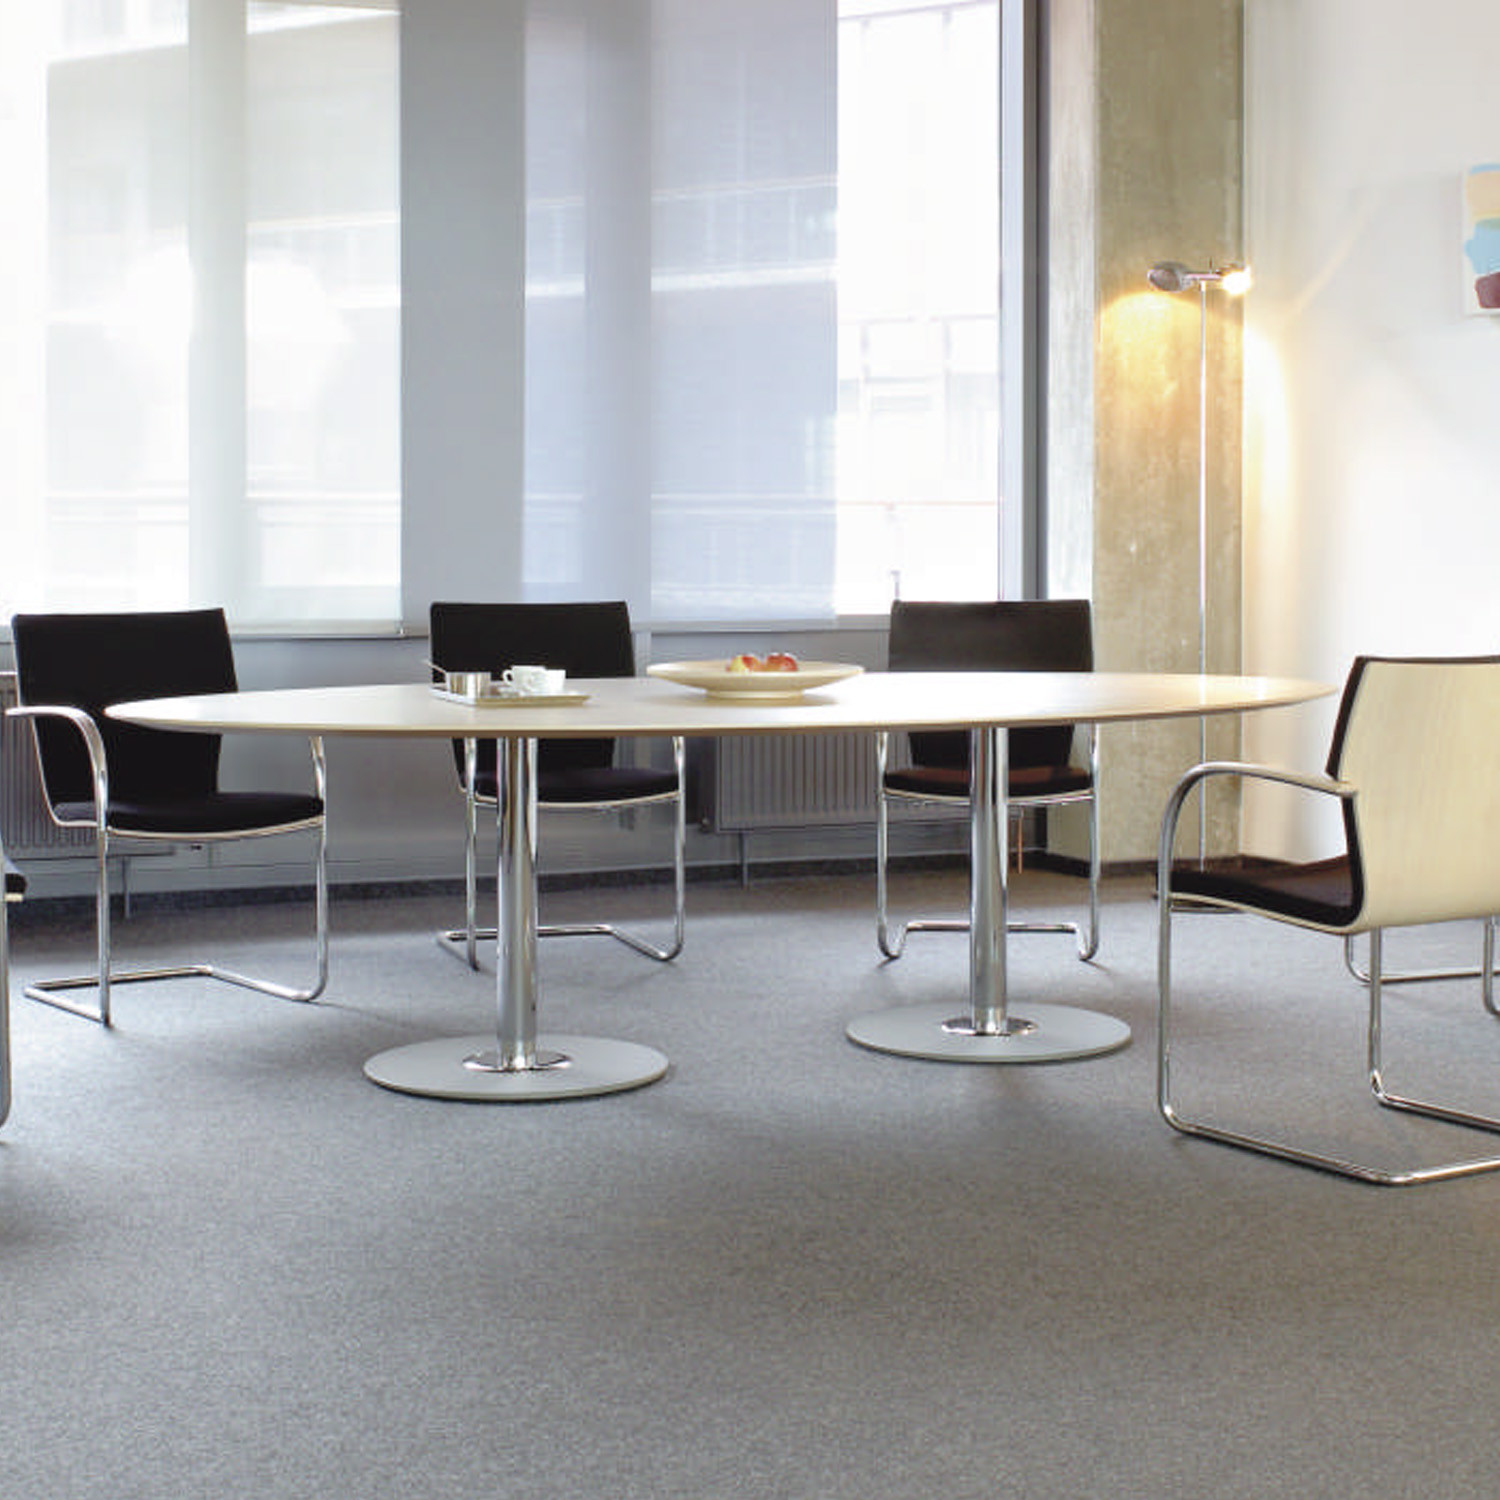 Spira Meeting Table with oval top